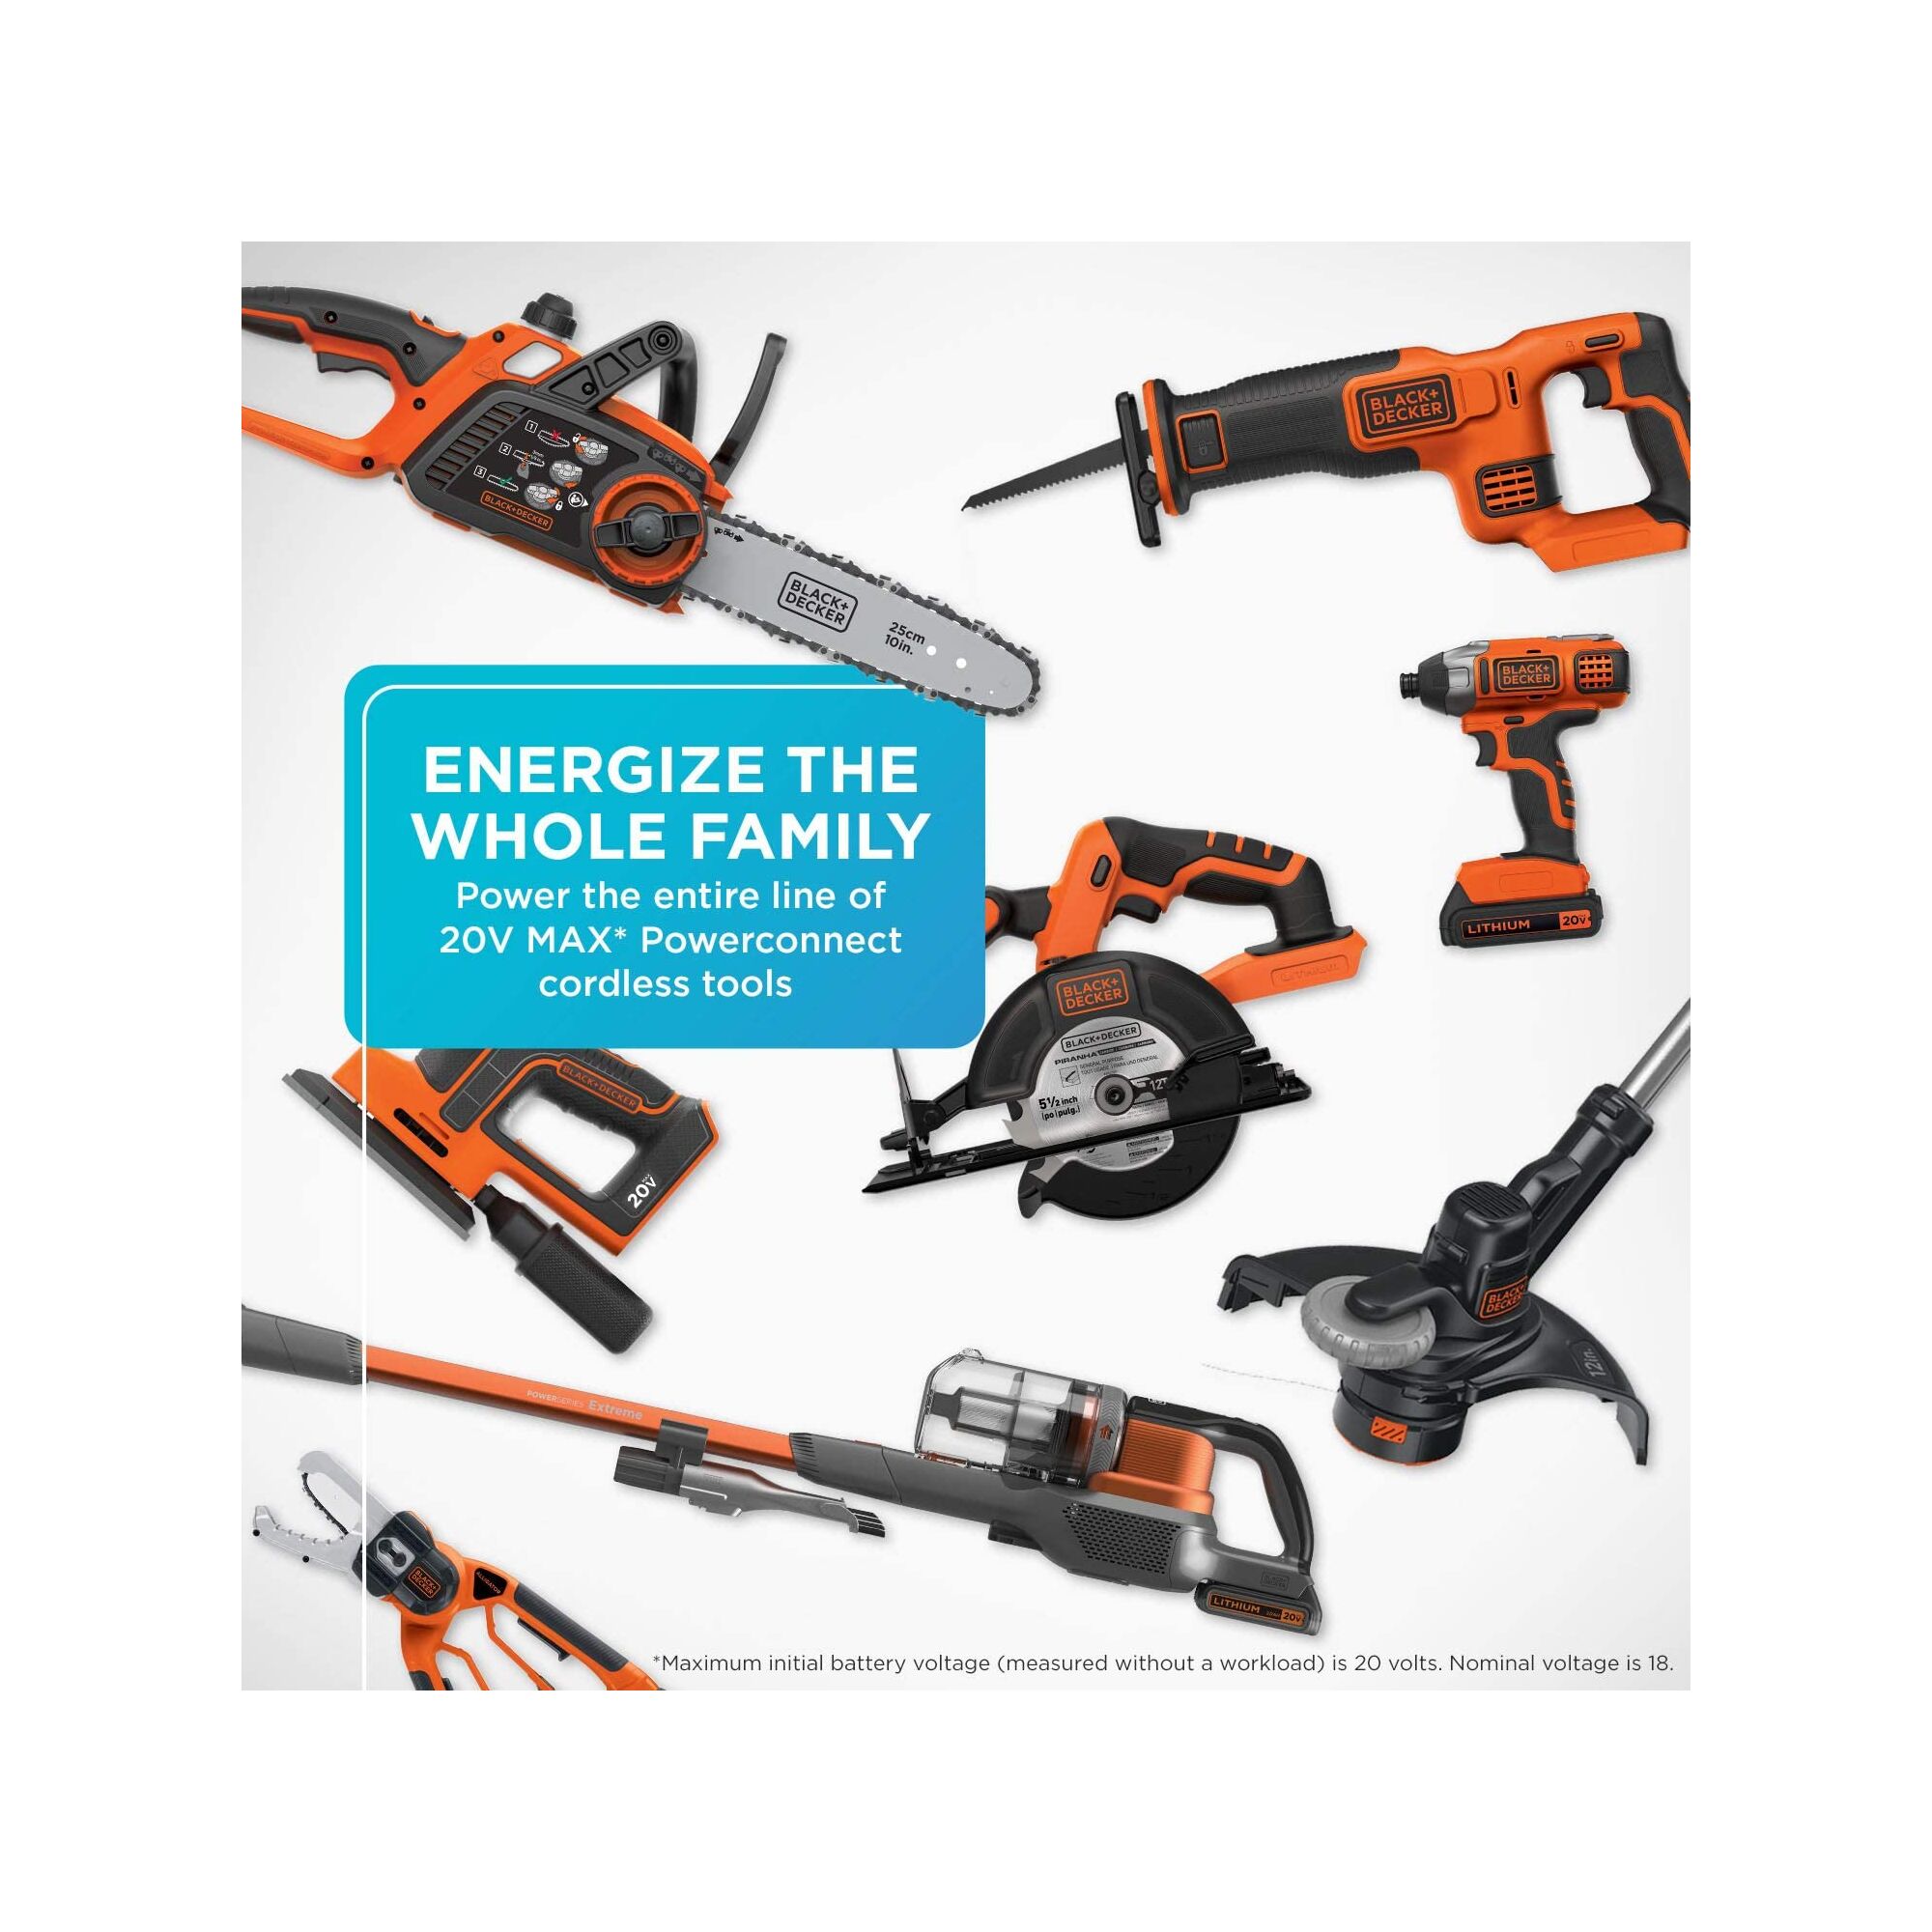 Graphic showing that one Powerconnect battery fits with 9 different tools from chain saw to edger to vacuum cleaner